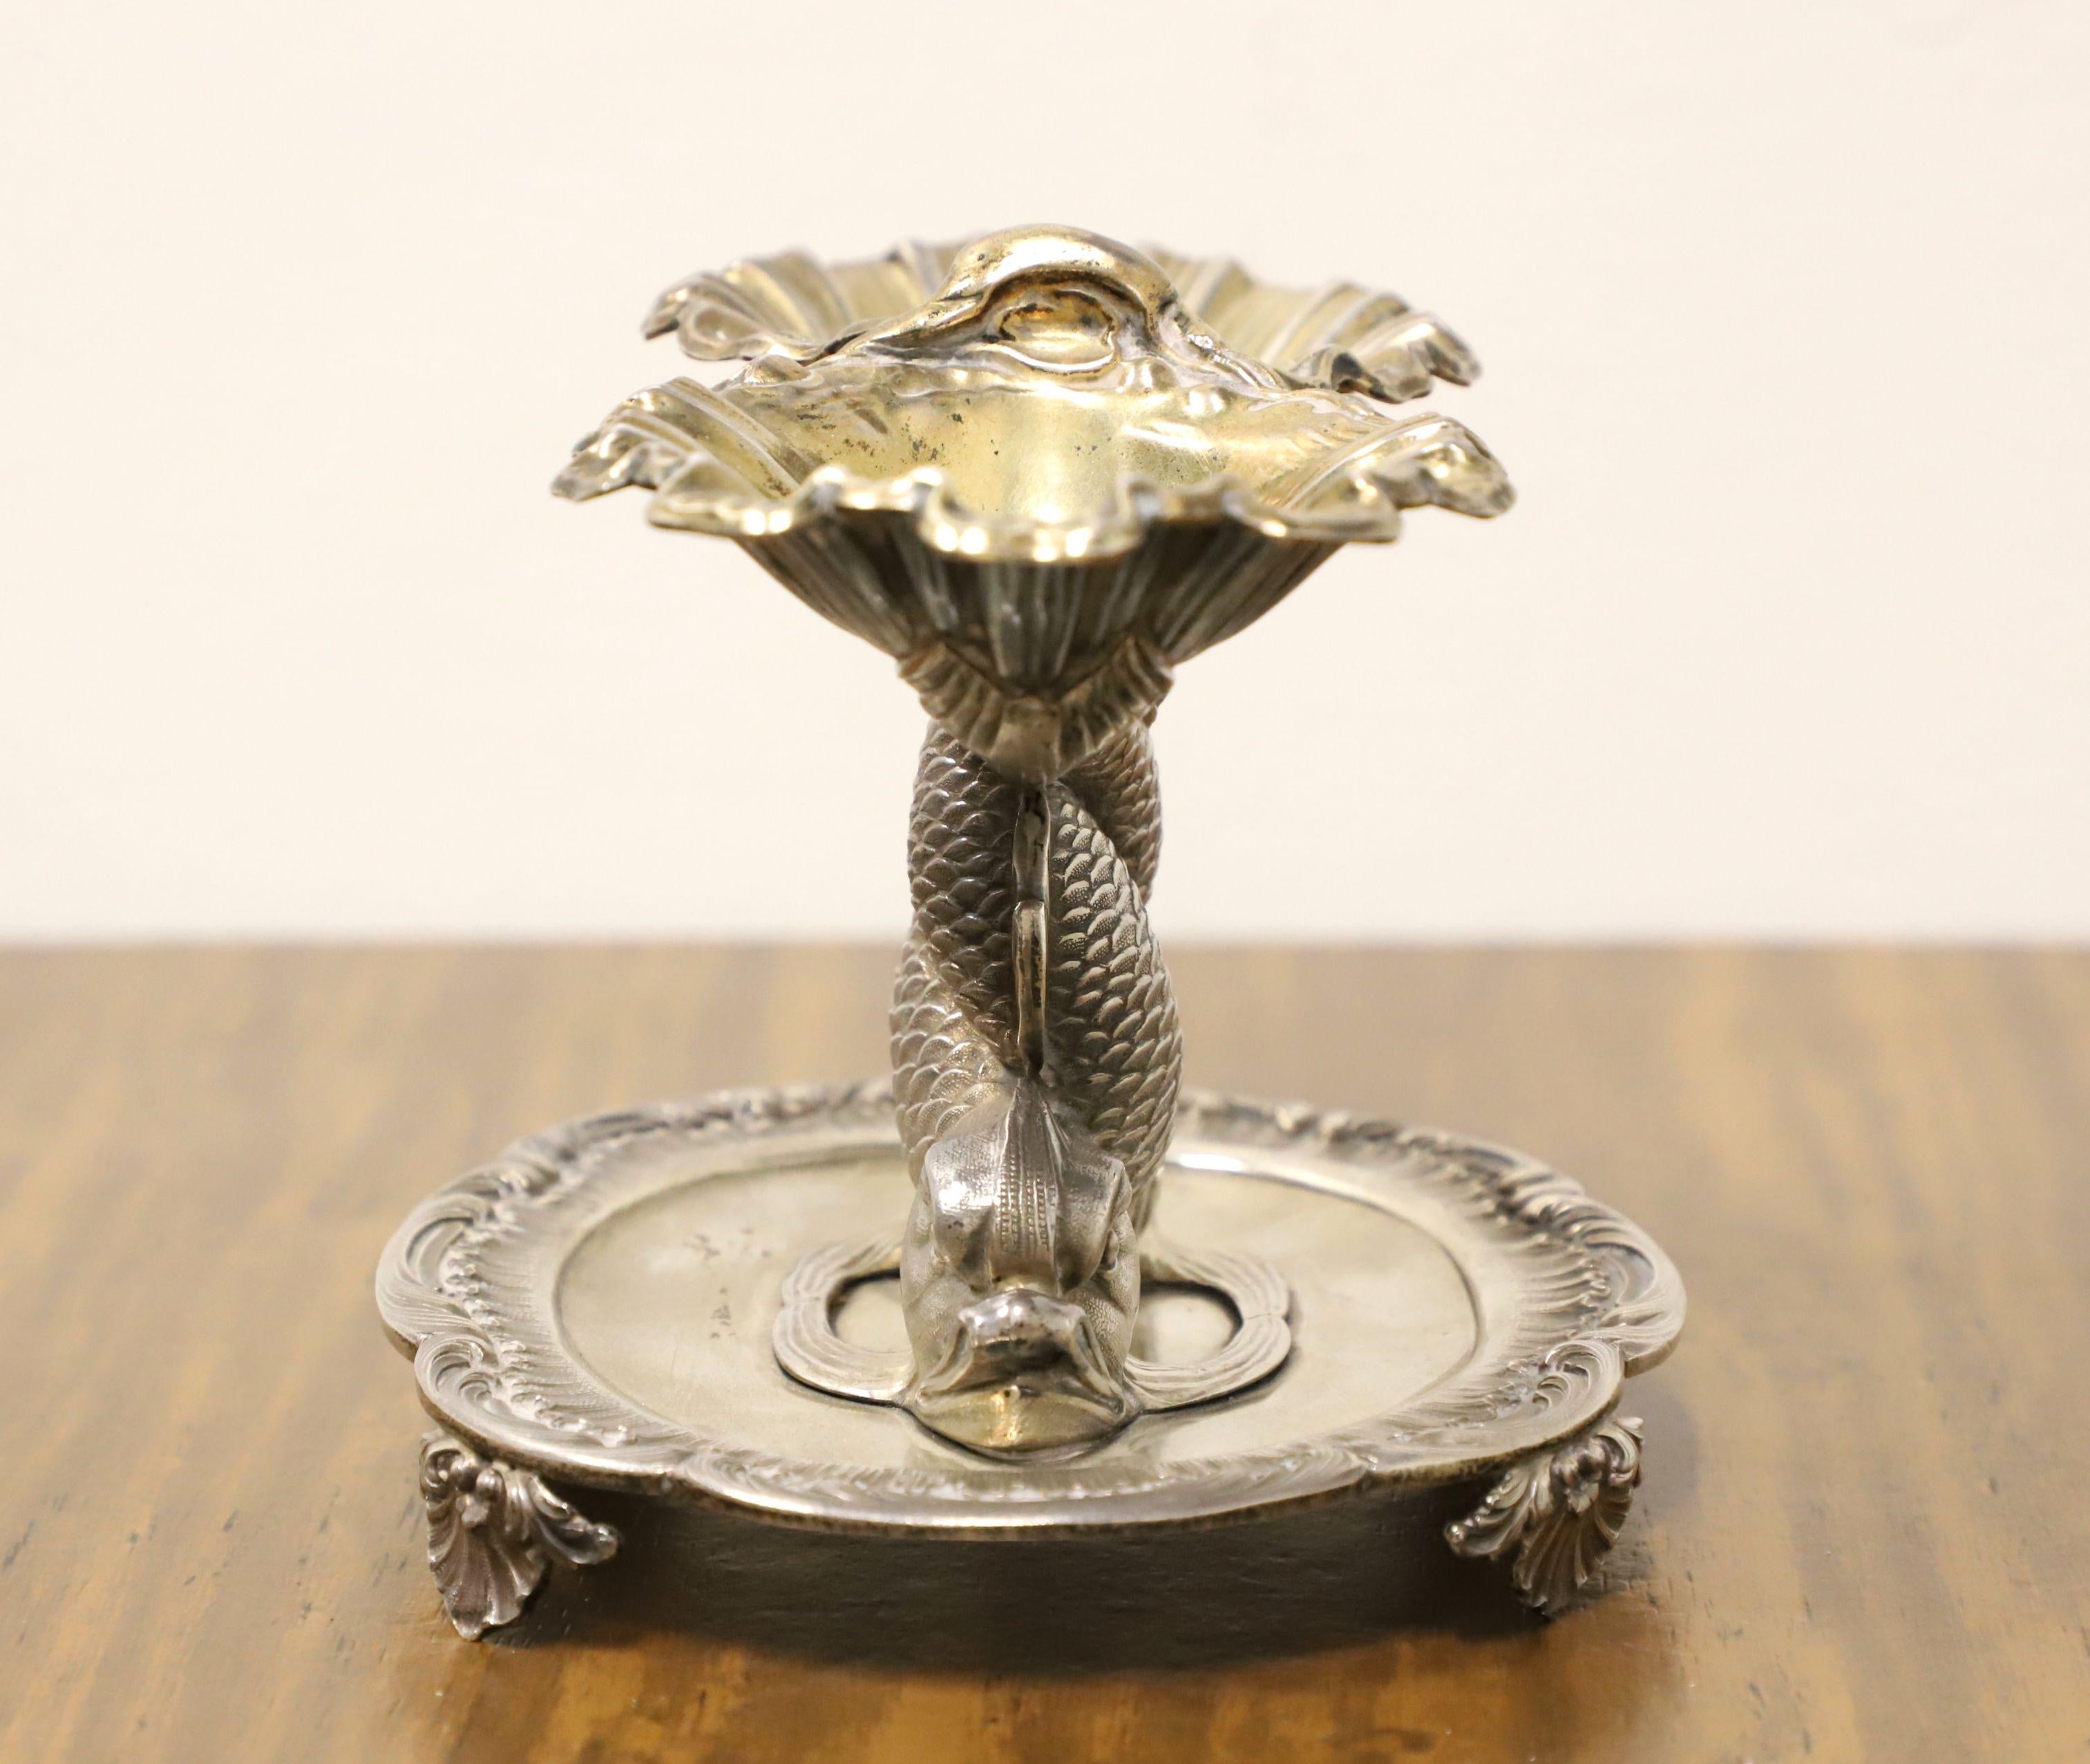 A French Louis XV style silver double salt cellar by the Parisian silversmith Jean-Baptiste-Claude Odiot. Crafted to the French silver standard, shaped like intertwined dolphins with their tails holding up two oyster shells and their heads resting